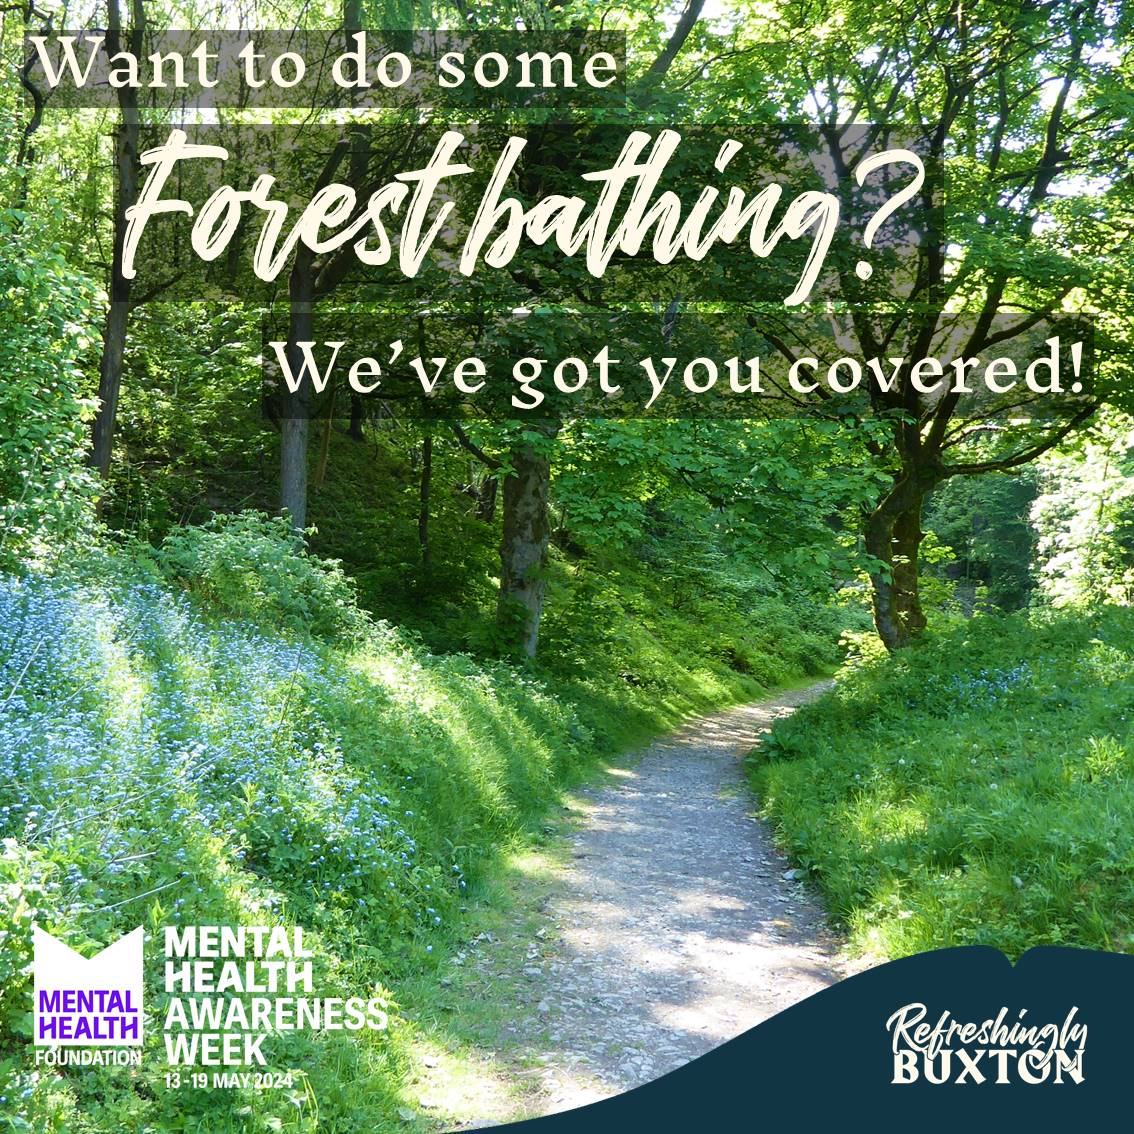 It’s #MentalHealthAwarenessWeek!

Want to do some forest bathing? We’ve got you covered in #Buxton… covered in canopies!  🌳🌳🌳

#MomentsForMovement #MHAW2024
#HighPeak #PeakDistrict #Derbyshire #SK17 #RefreshinglyBuxton #VisitBuxton @mentalhealth @BCA1967  @BuxtonGrapevine